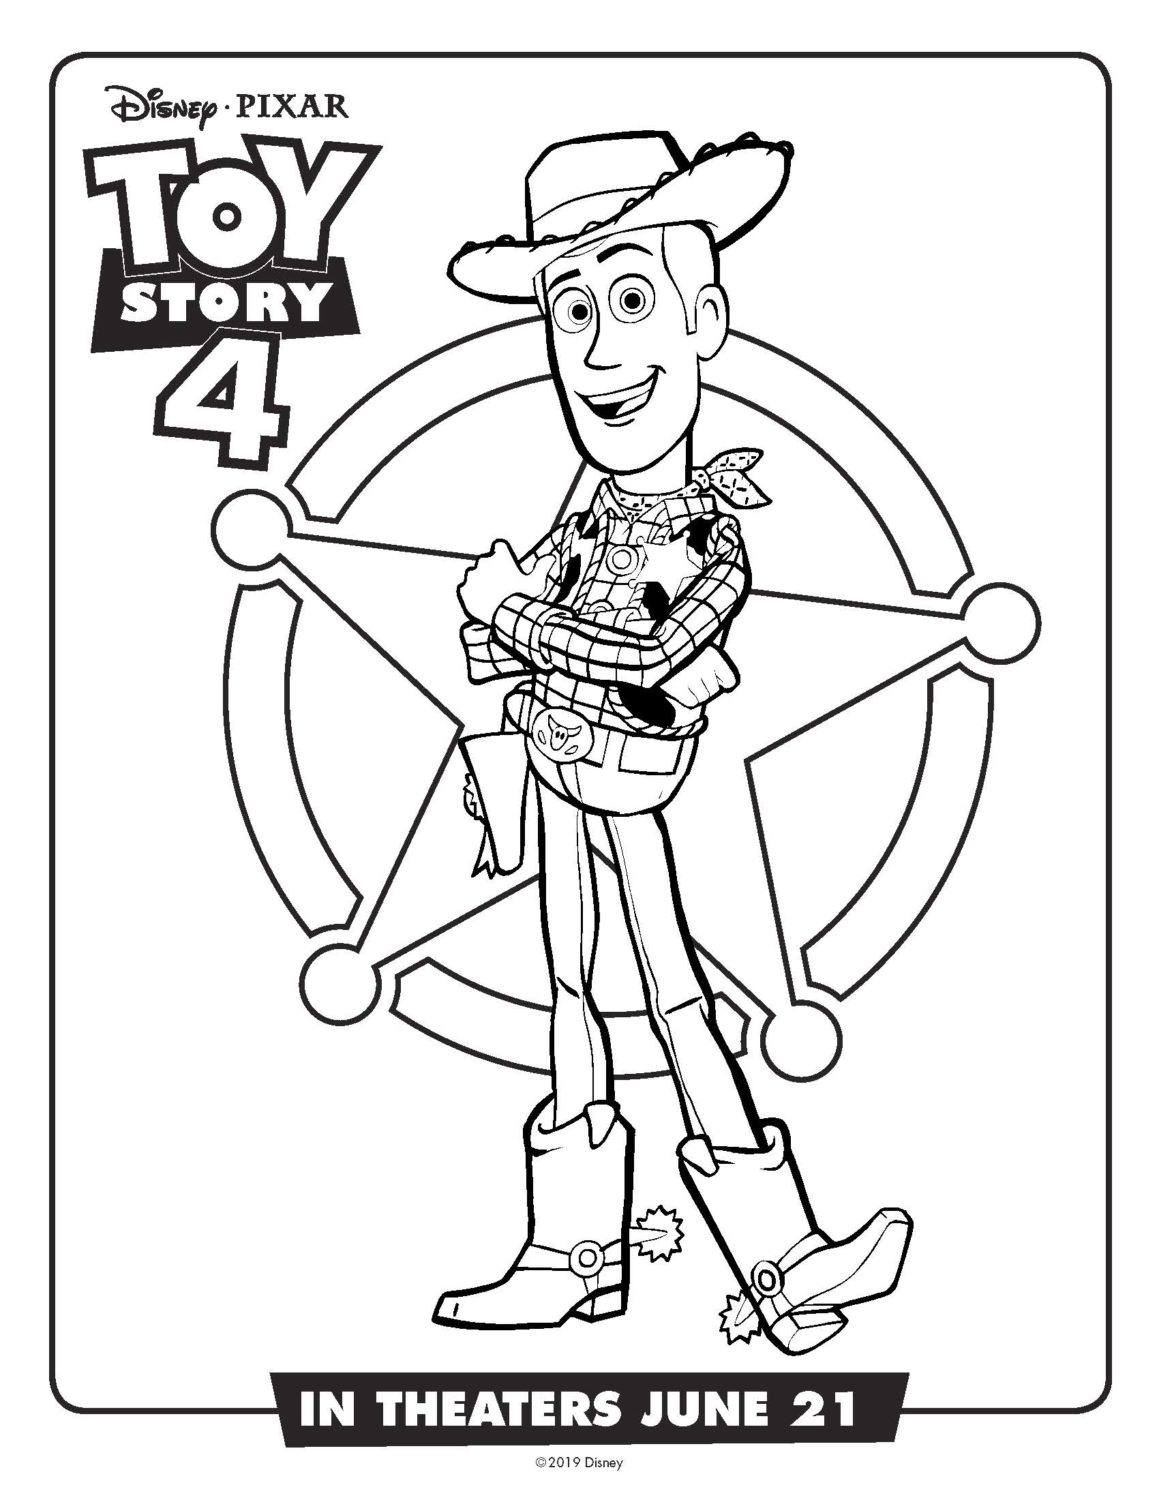 Toy Story 4 Woody Coloring Page and Activity Sheet